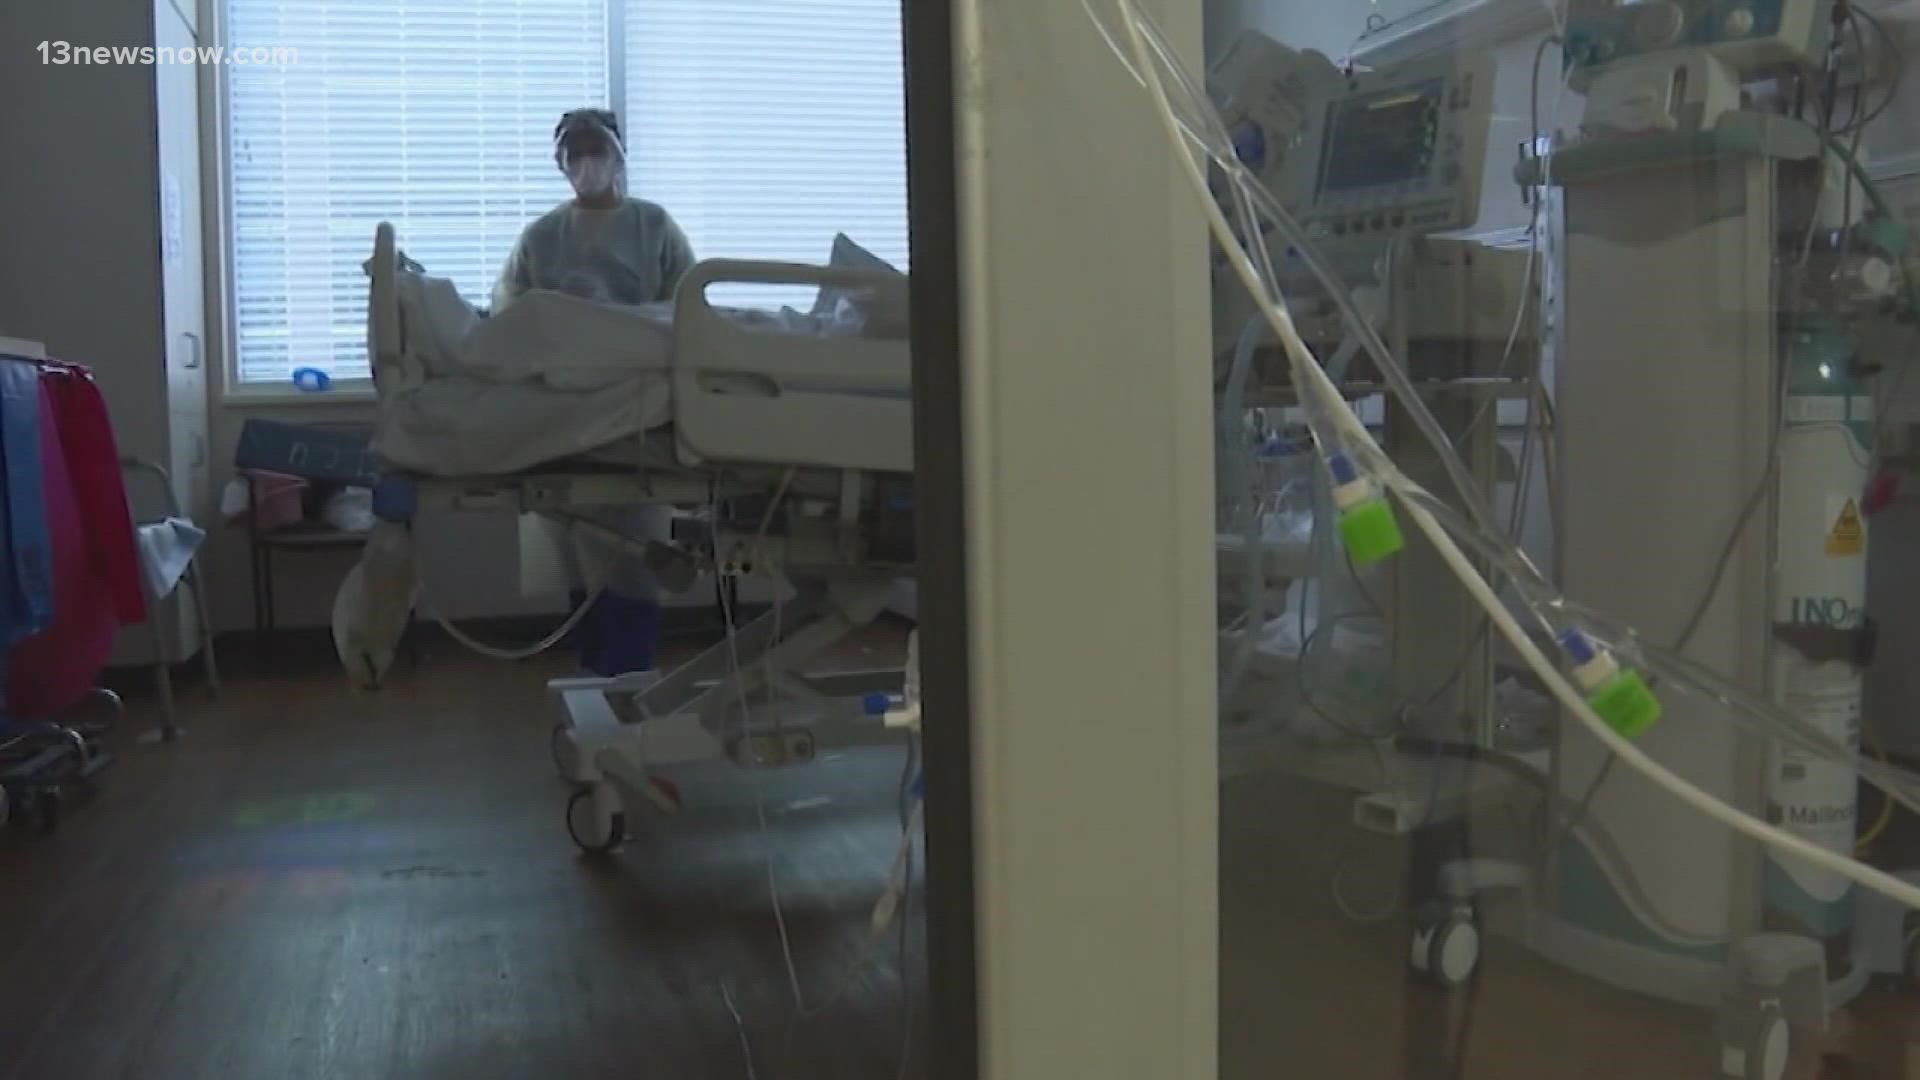 The Virginia Department of Health is researching why the death rate for COVID-19 has risen.